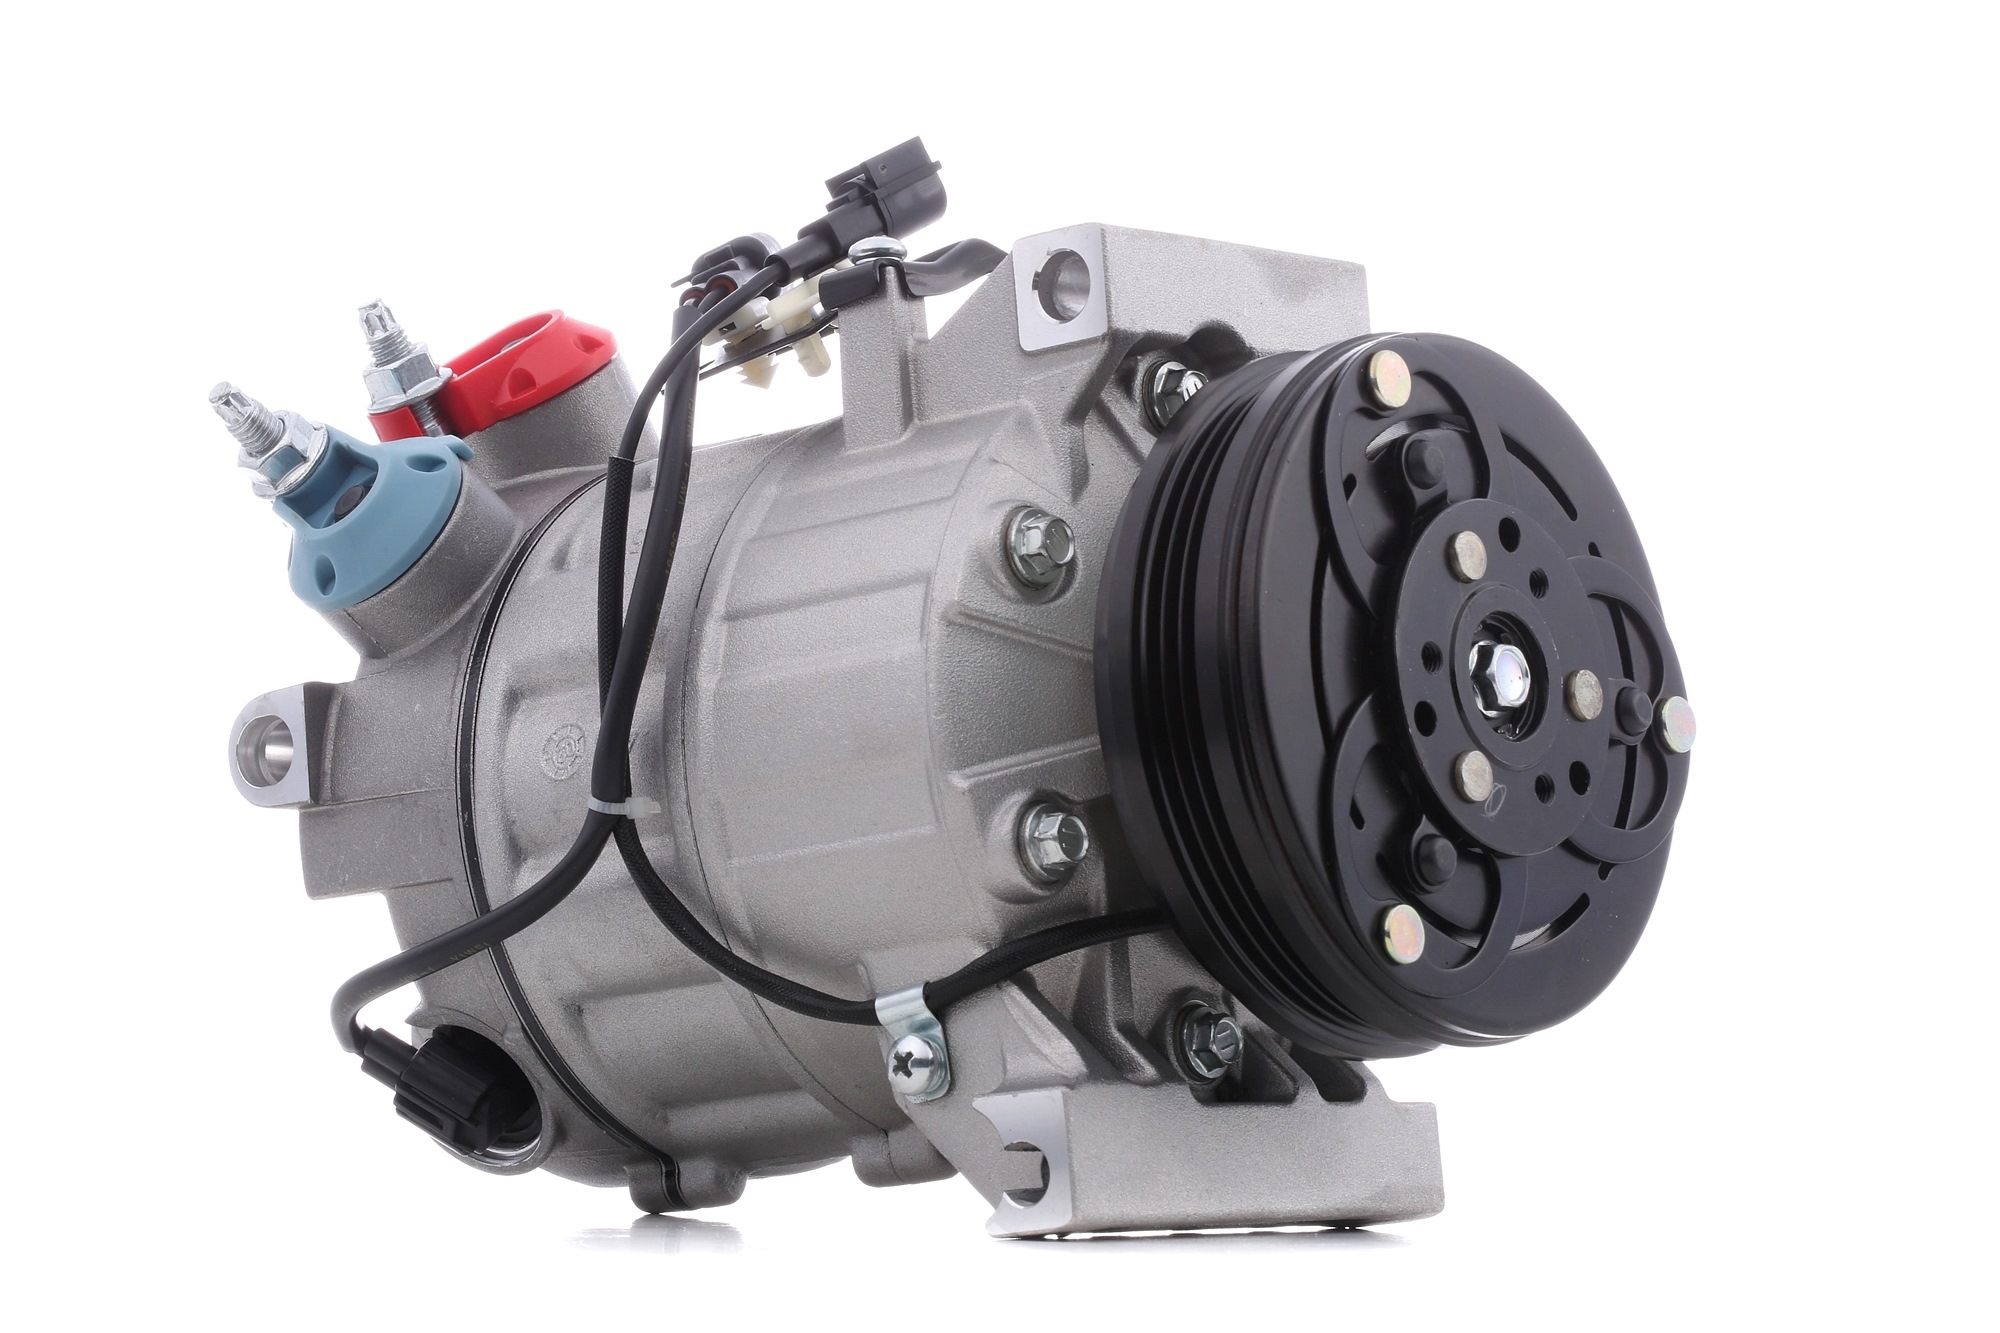 STARK SKKM-0340178 Air conditioning compressor PXC16, PAG 46, R 134a